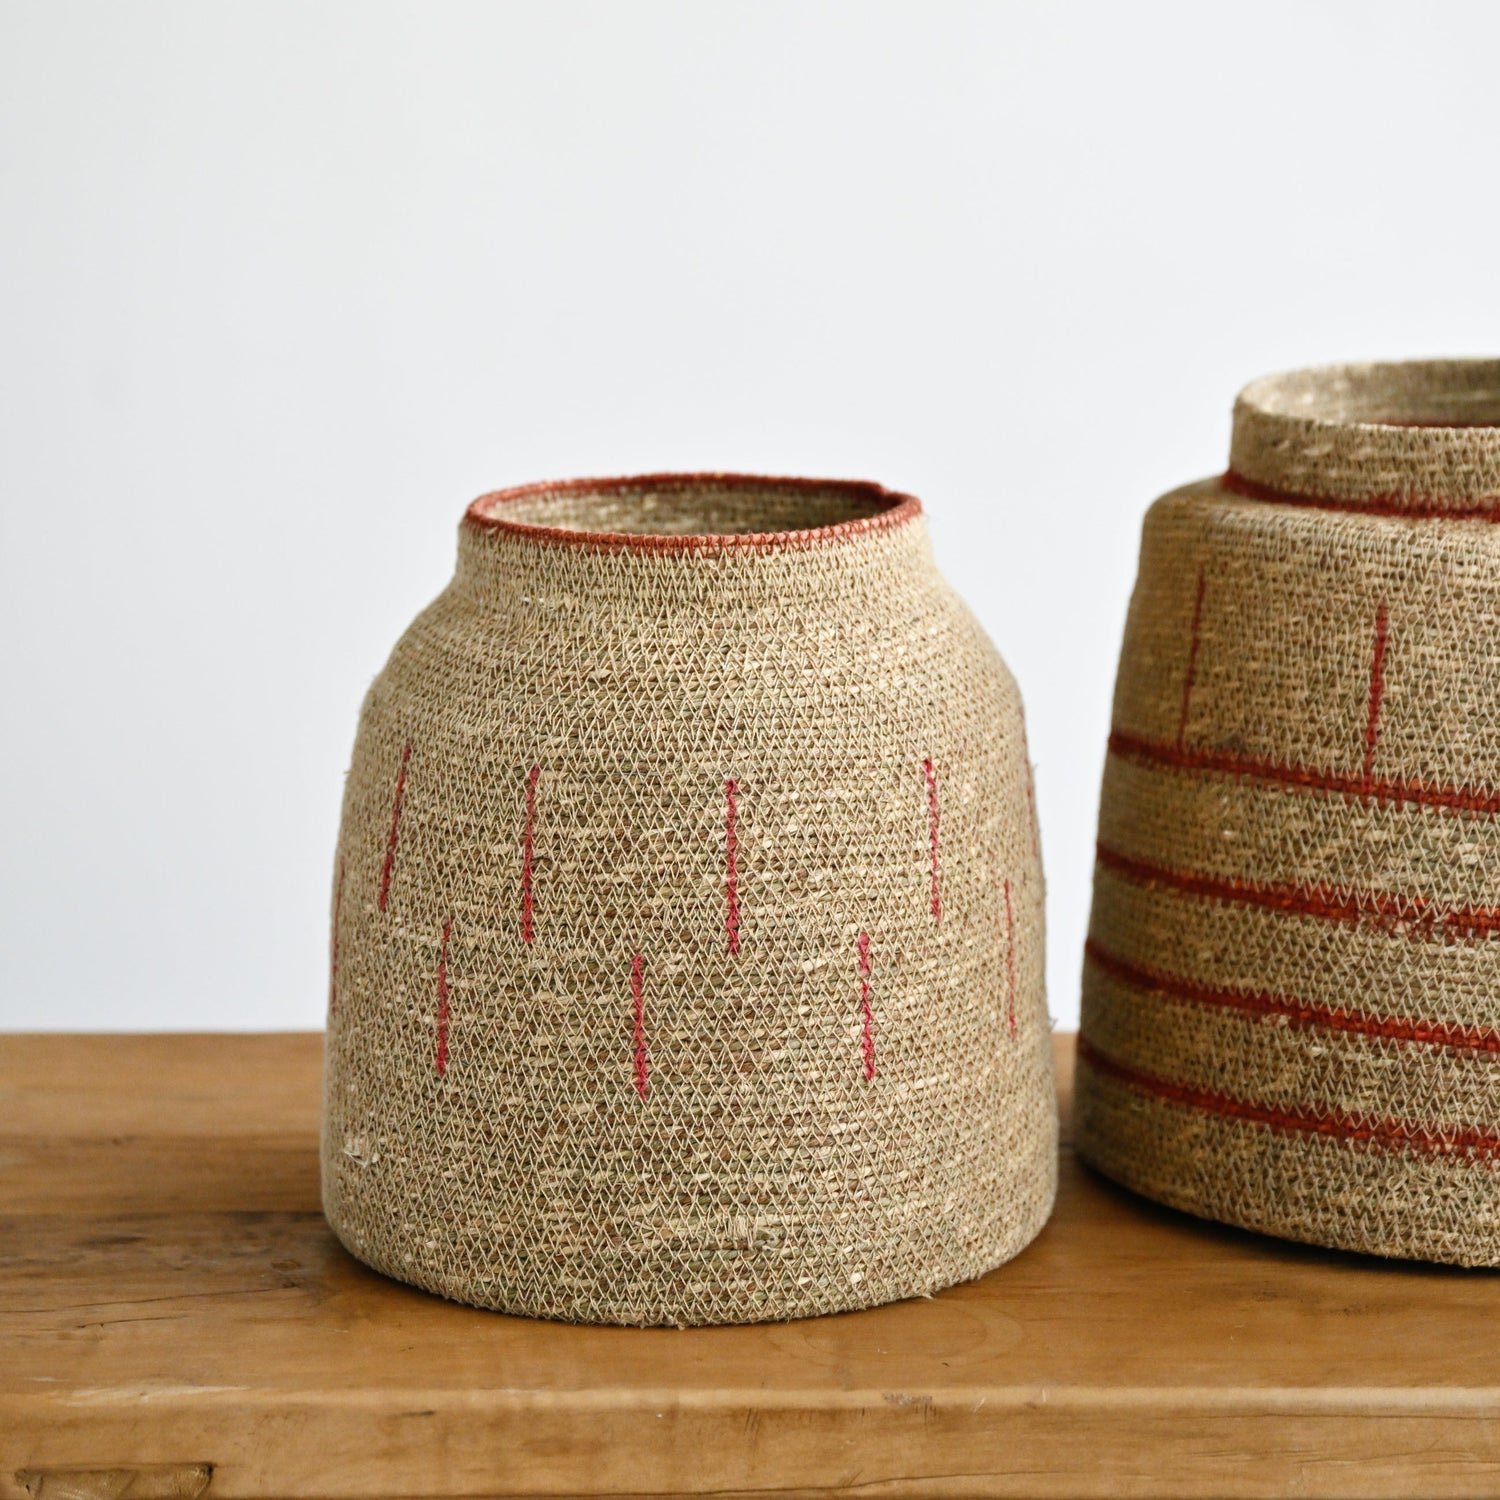 Zouk Woven Baskets with Verticle Lines